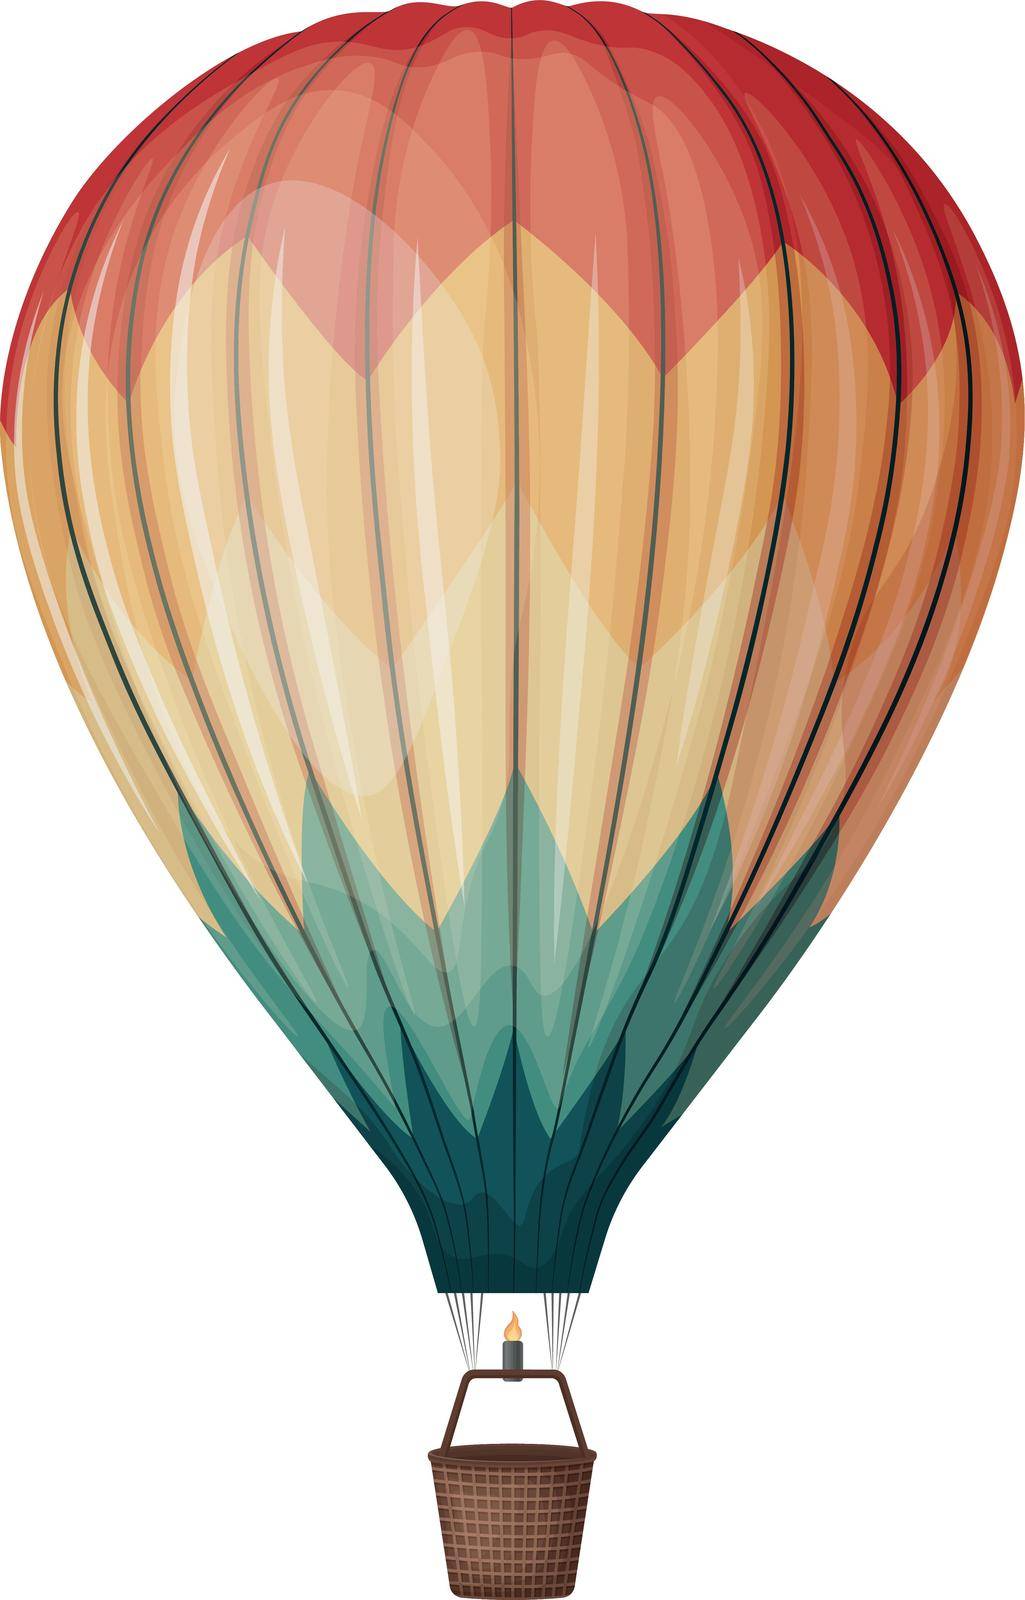 Air balloon. An image of a balloon for flying and traveling. Hot air balloon. Multicolored balloon. Vector illustration isolated on a white background.